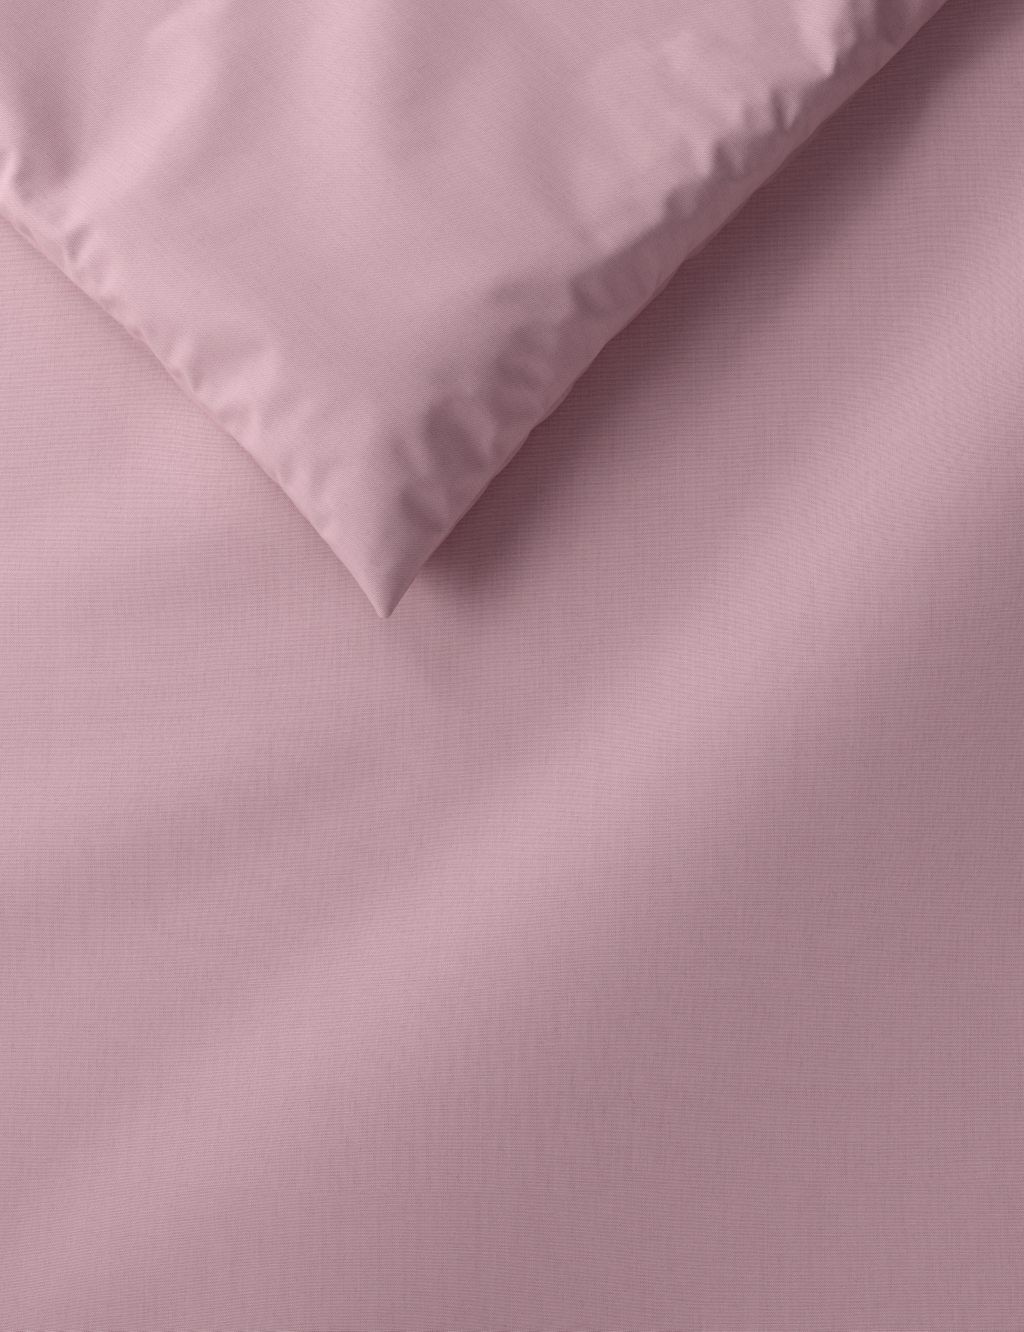 Comfortably Cool Lyocell Rich Duvet Cover image 2